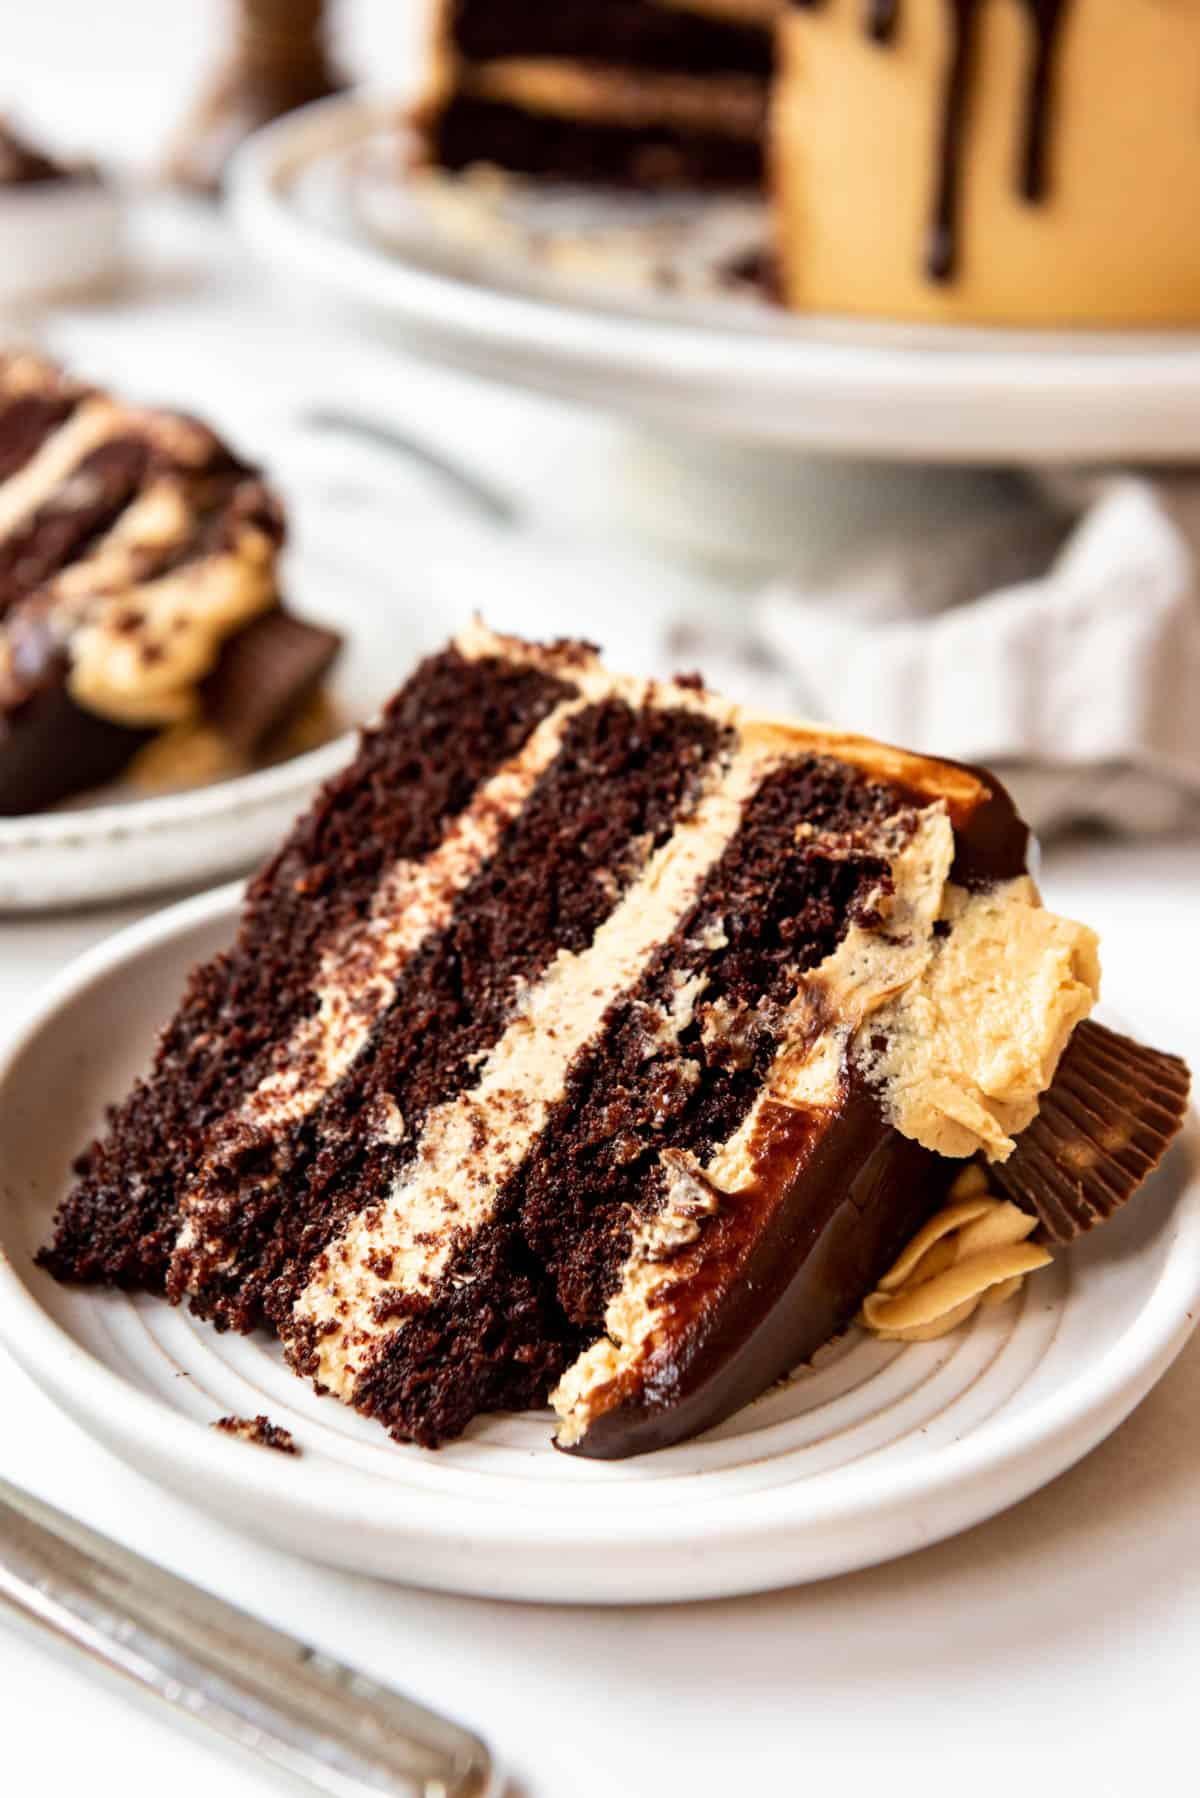 Close up of a slice of chocolate peanut butter cake on a white plate.